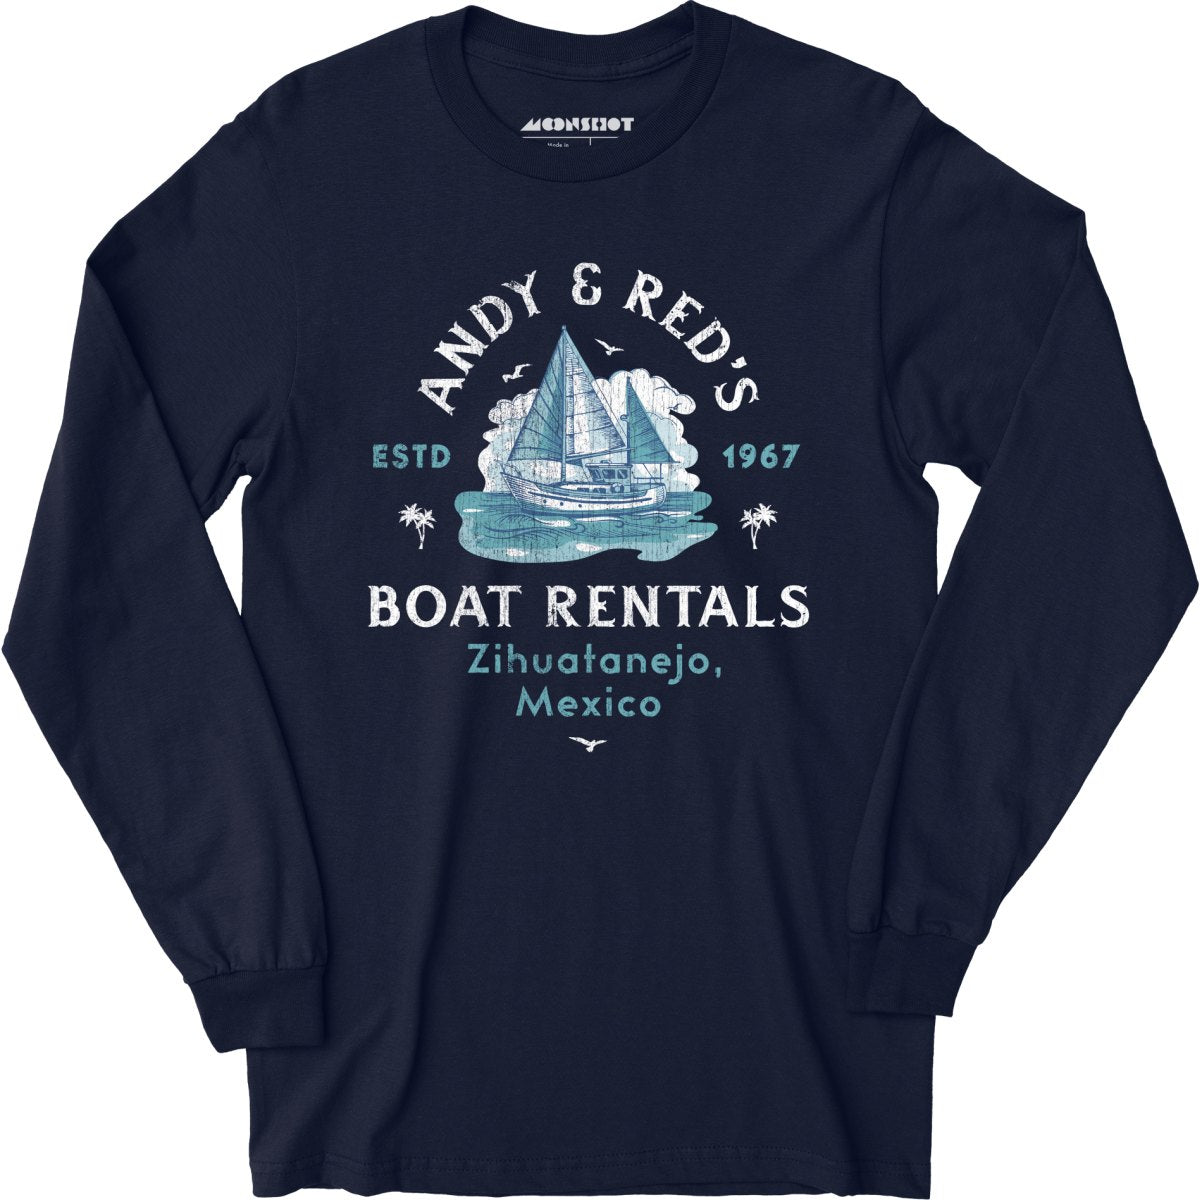 Andy & Red's Boat Rentals - Long Sleeve T-Shirt